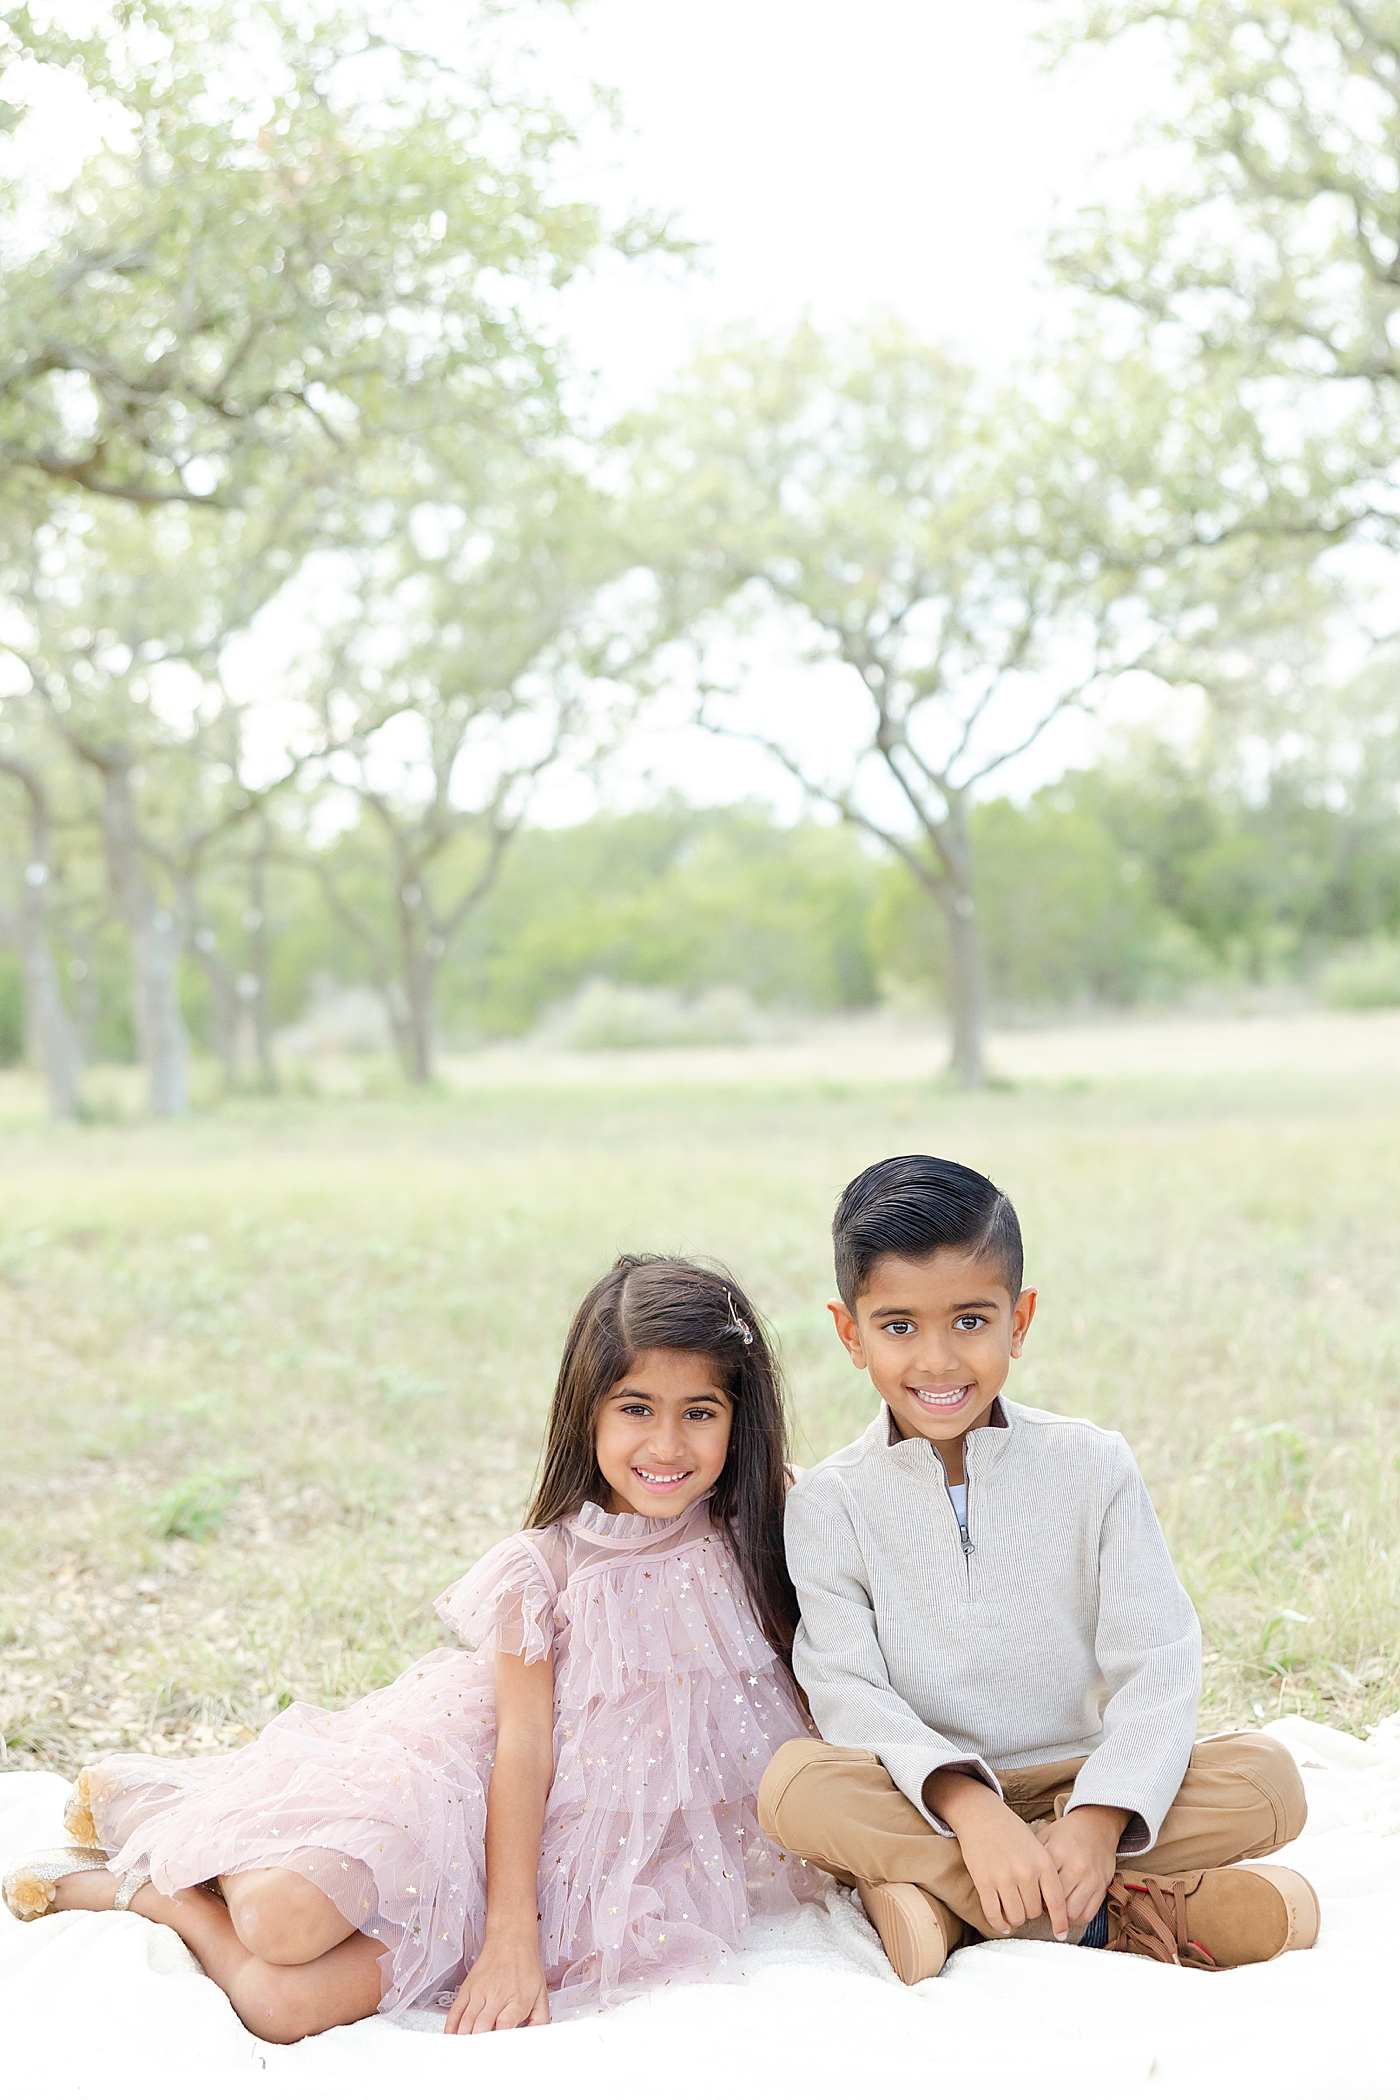 Siblings sitting on a blanket during their Field Family Session | Image by Sana Ahmed Photography